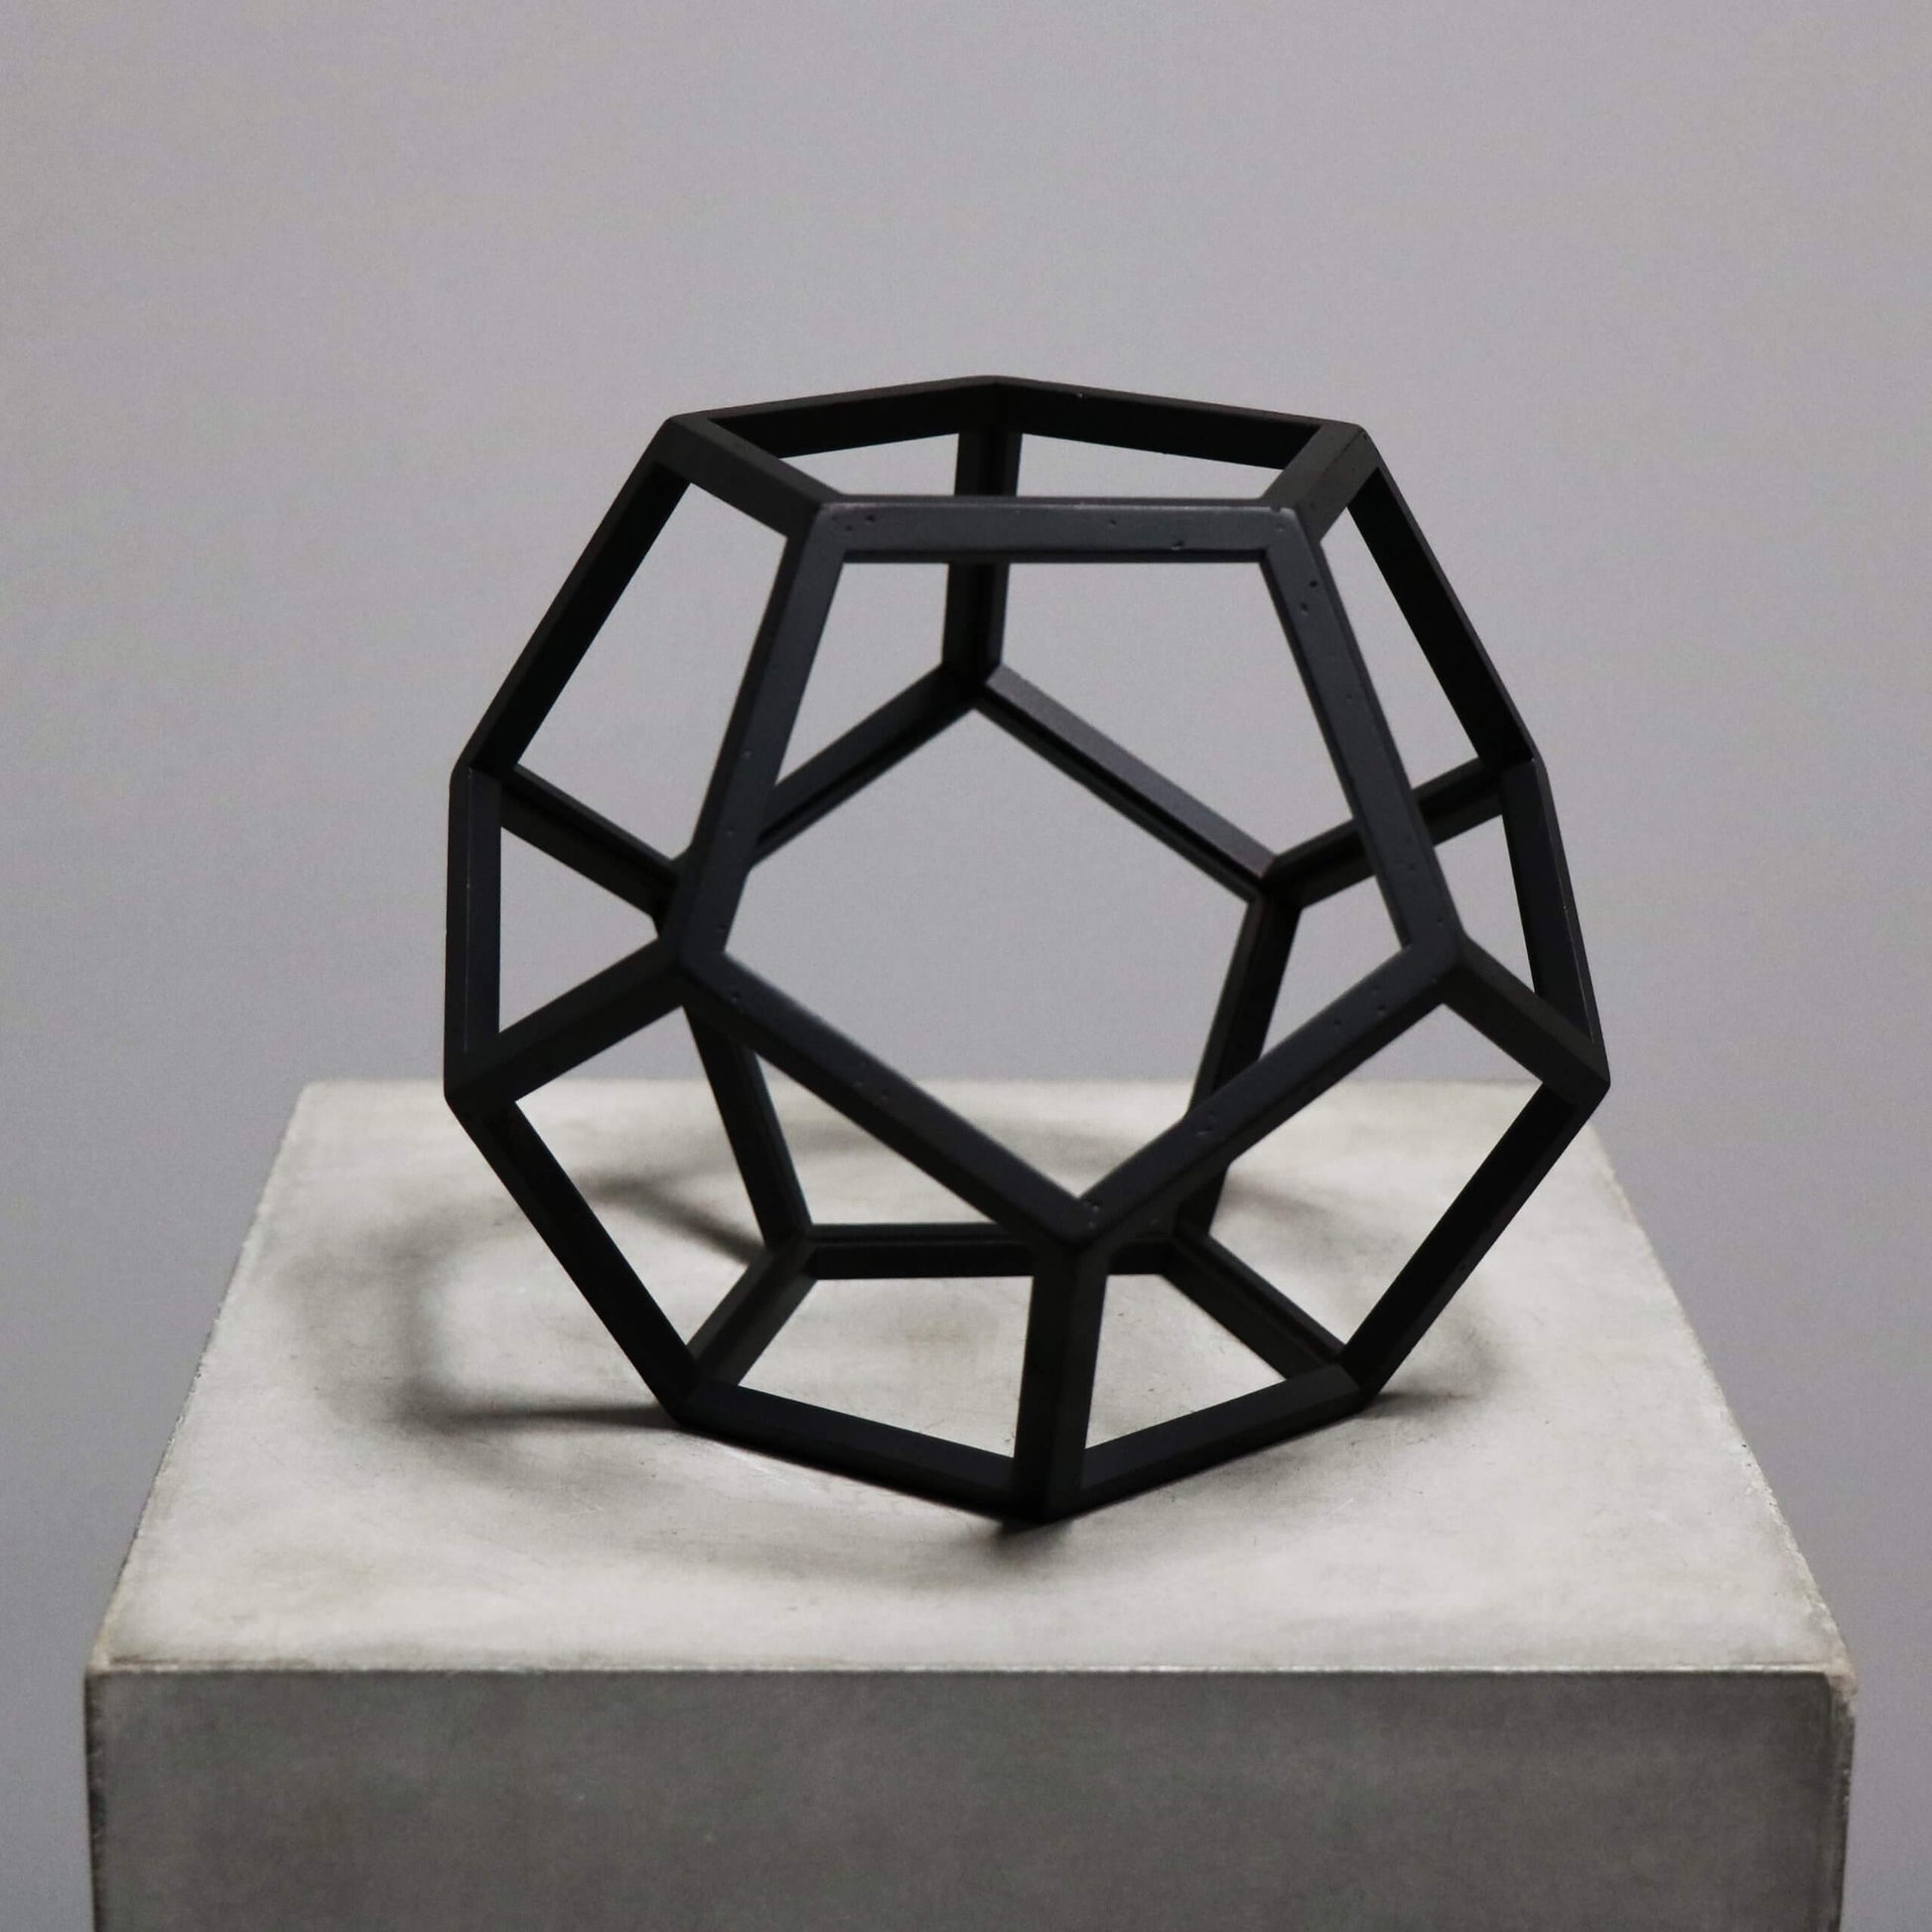 Beautiful geometrical model in burnt black wood dodecahedron